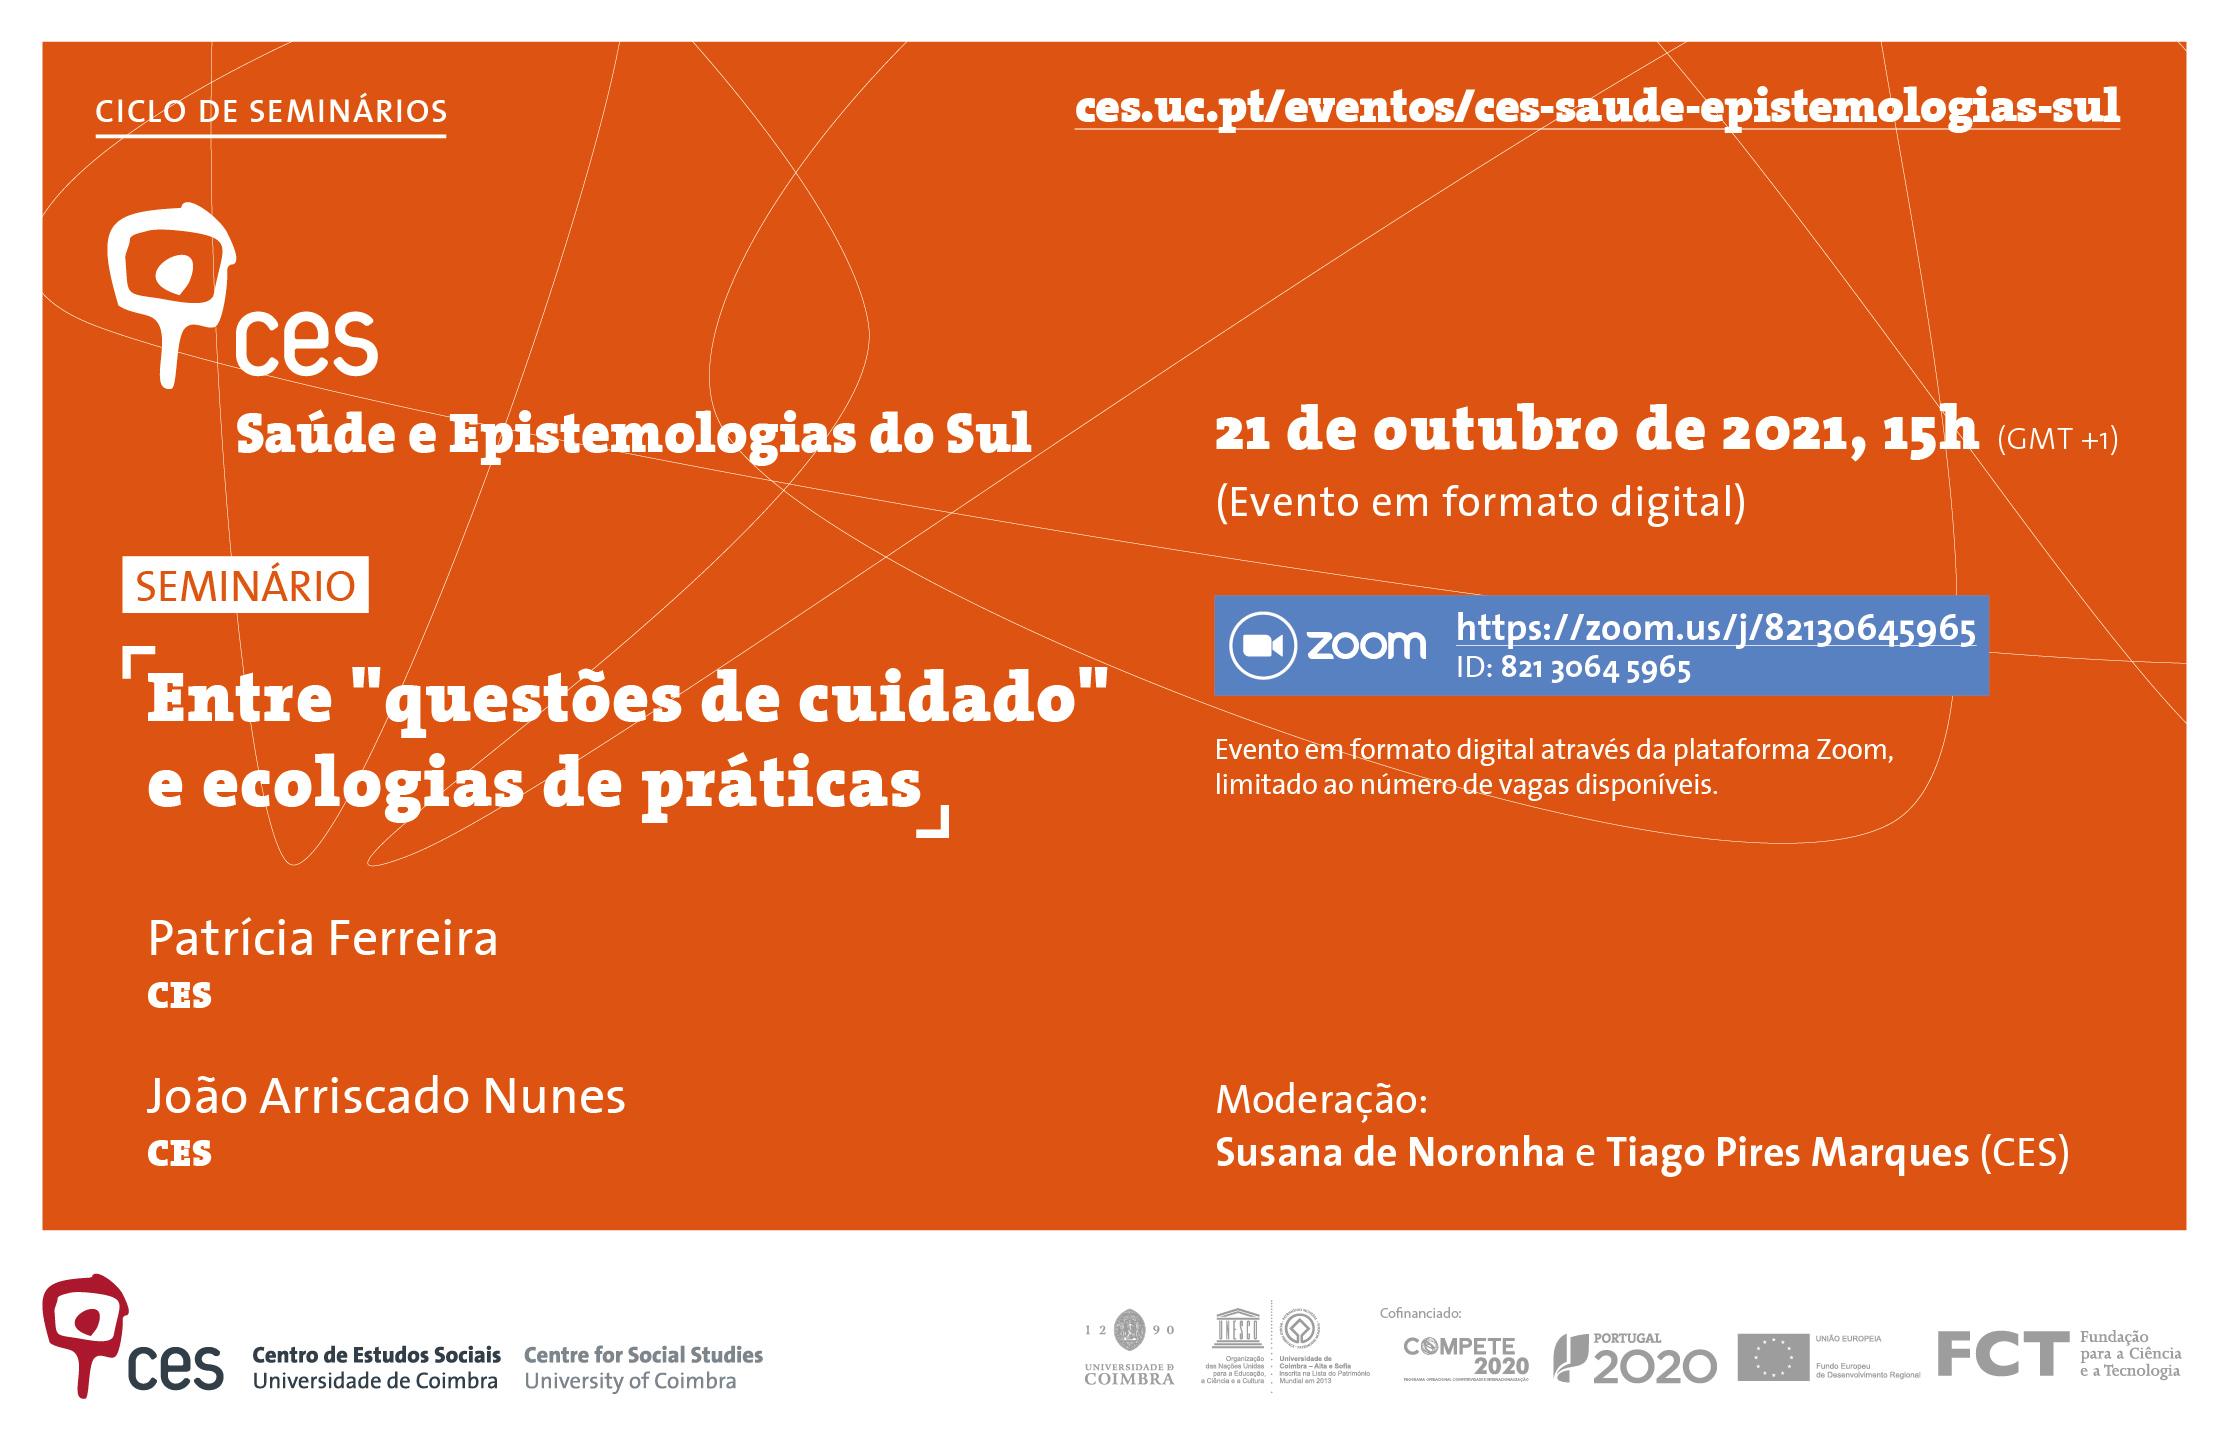 Between "issues of care" and ecologies of practices  <span id="edit_35083"><script>$(function() { $('#edit_35083').load( "/myces/user/editobj.php?tipo=evento&id=35083" ); });</script></span>